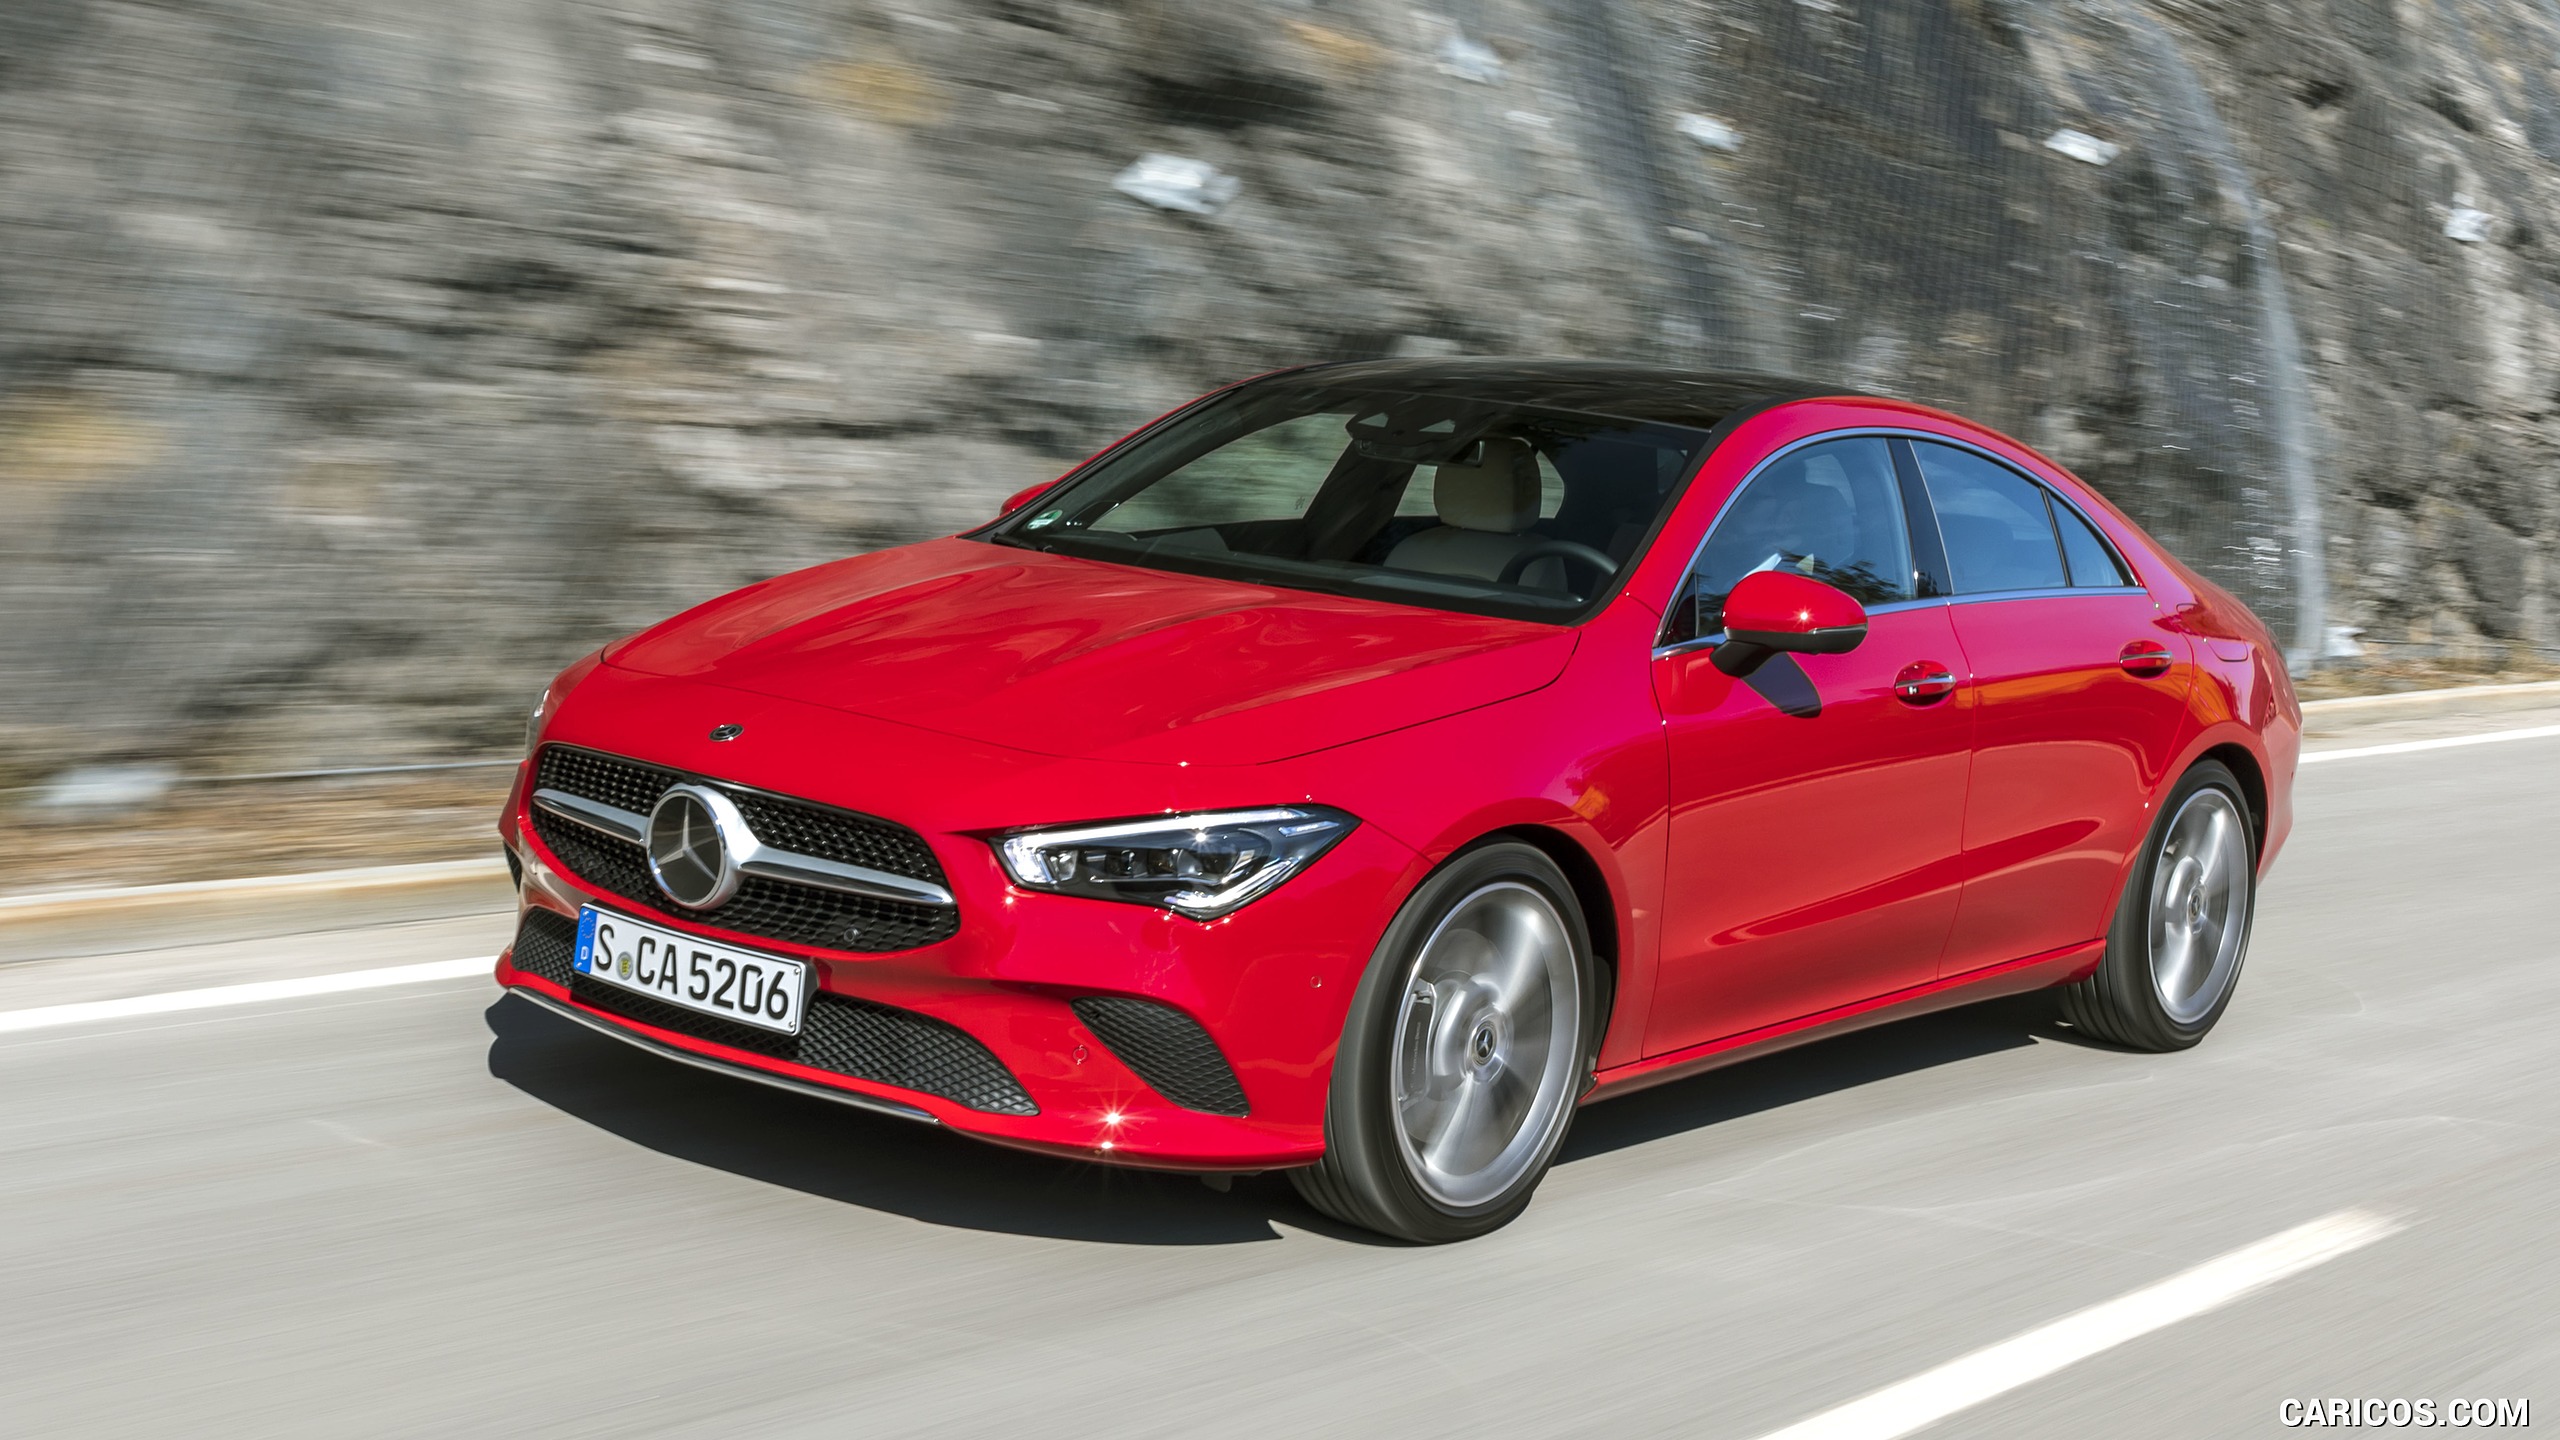 Fancy kjole Indeholde Automatisering 2020 Mercedes-Benz CLA 200 Coupe (Color: Jupiter Red) - Front Three-Quarter  | Caricos